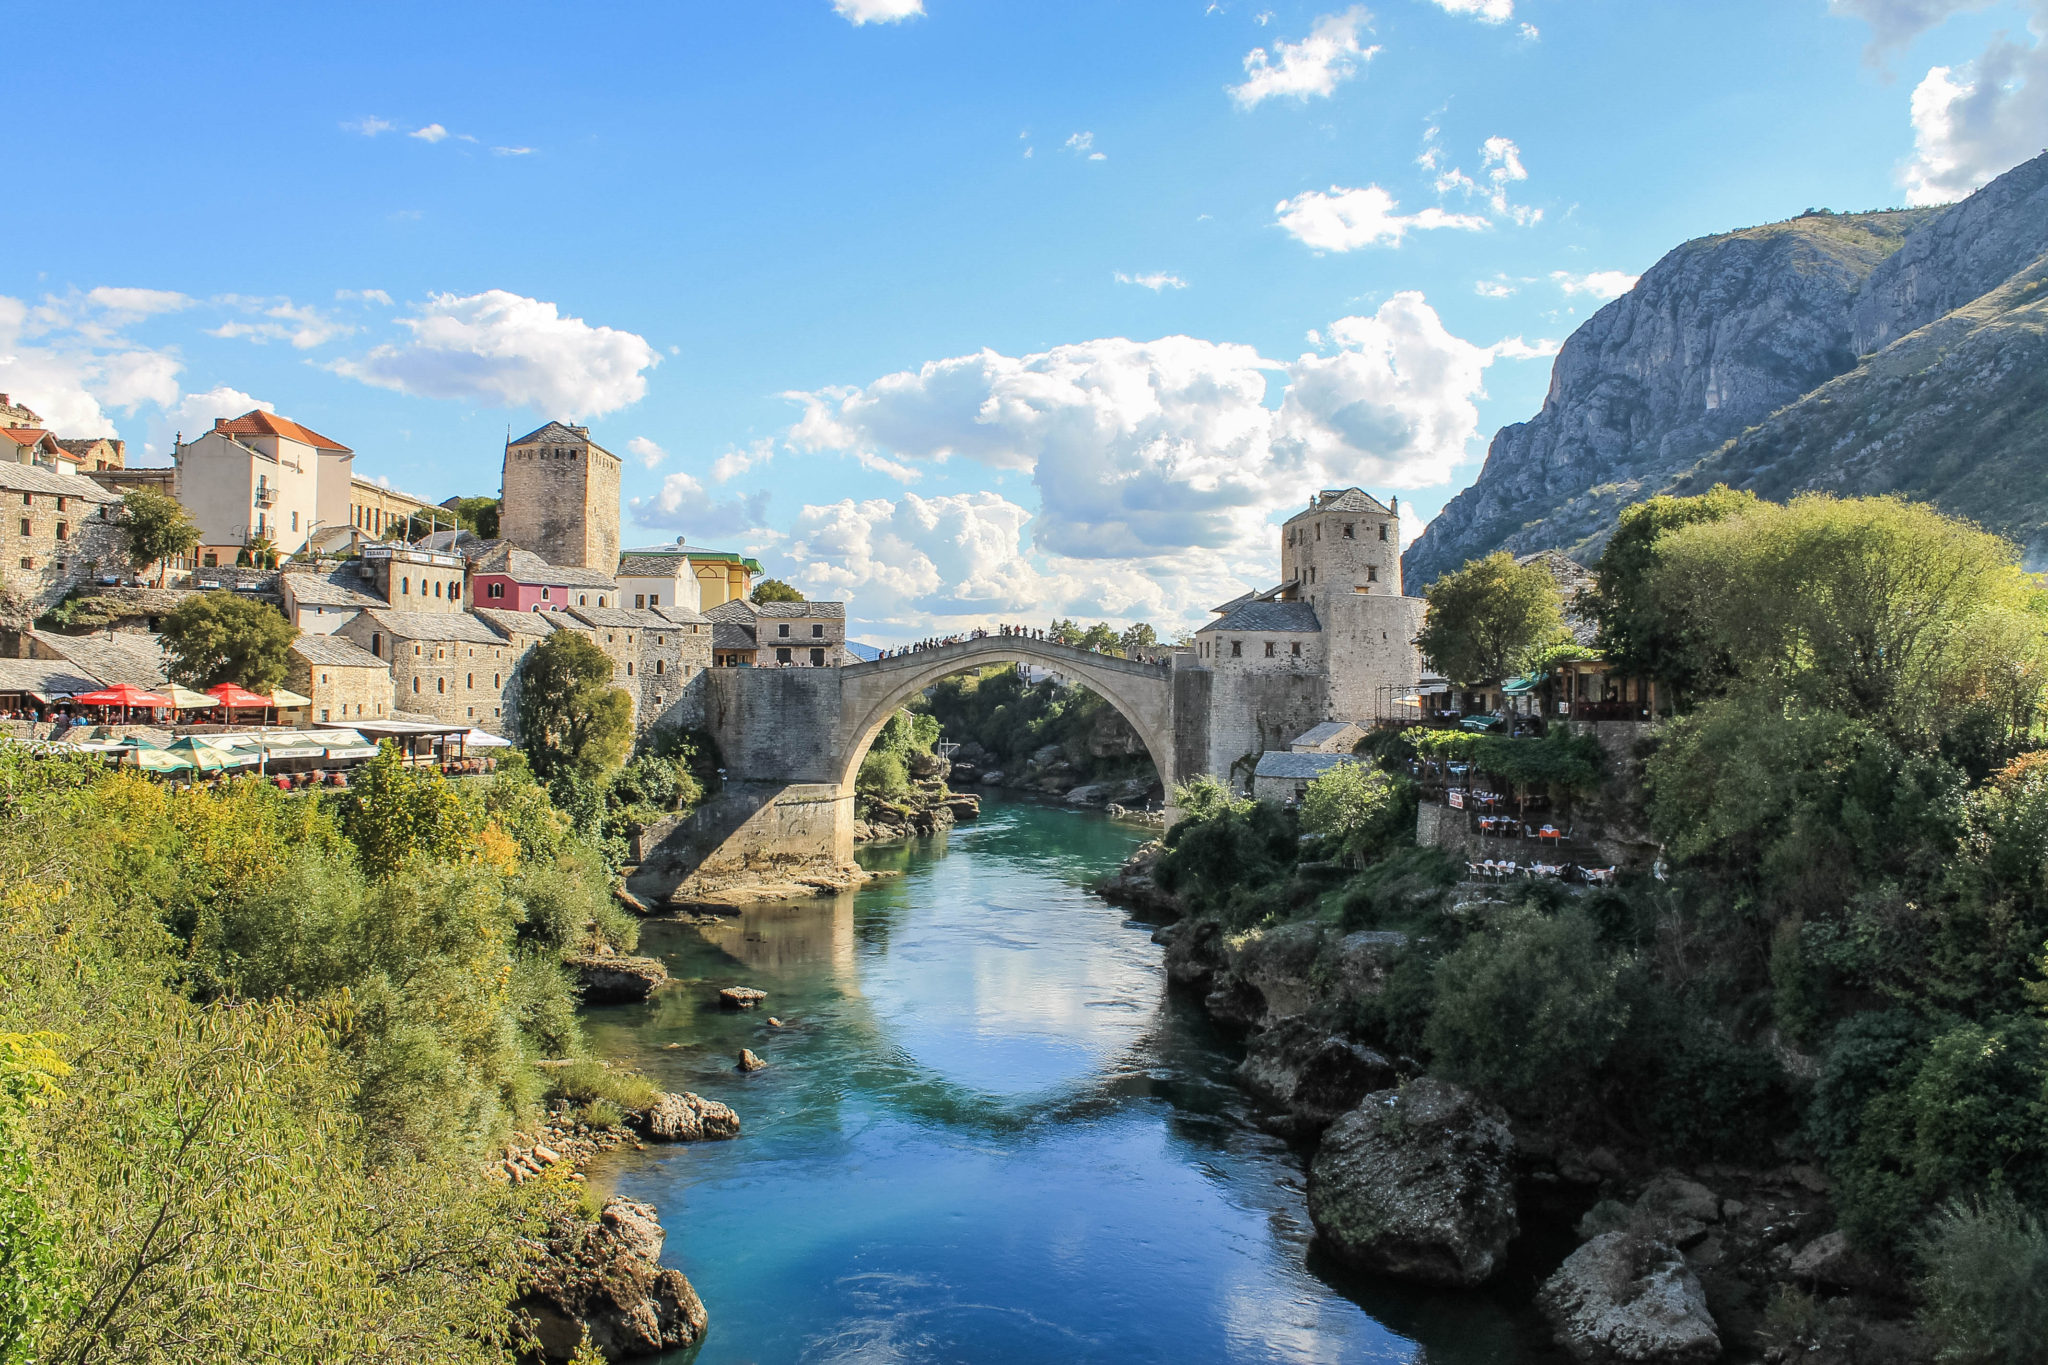 View of Stari Most in Bosnia and Herzegovina from Koski Mehmed Pasha Mosque. Mostar is a good day trip from Dubrovnik.